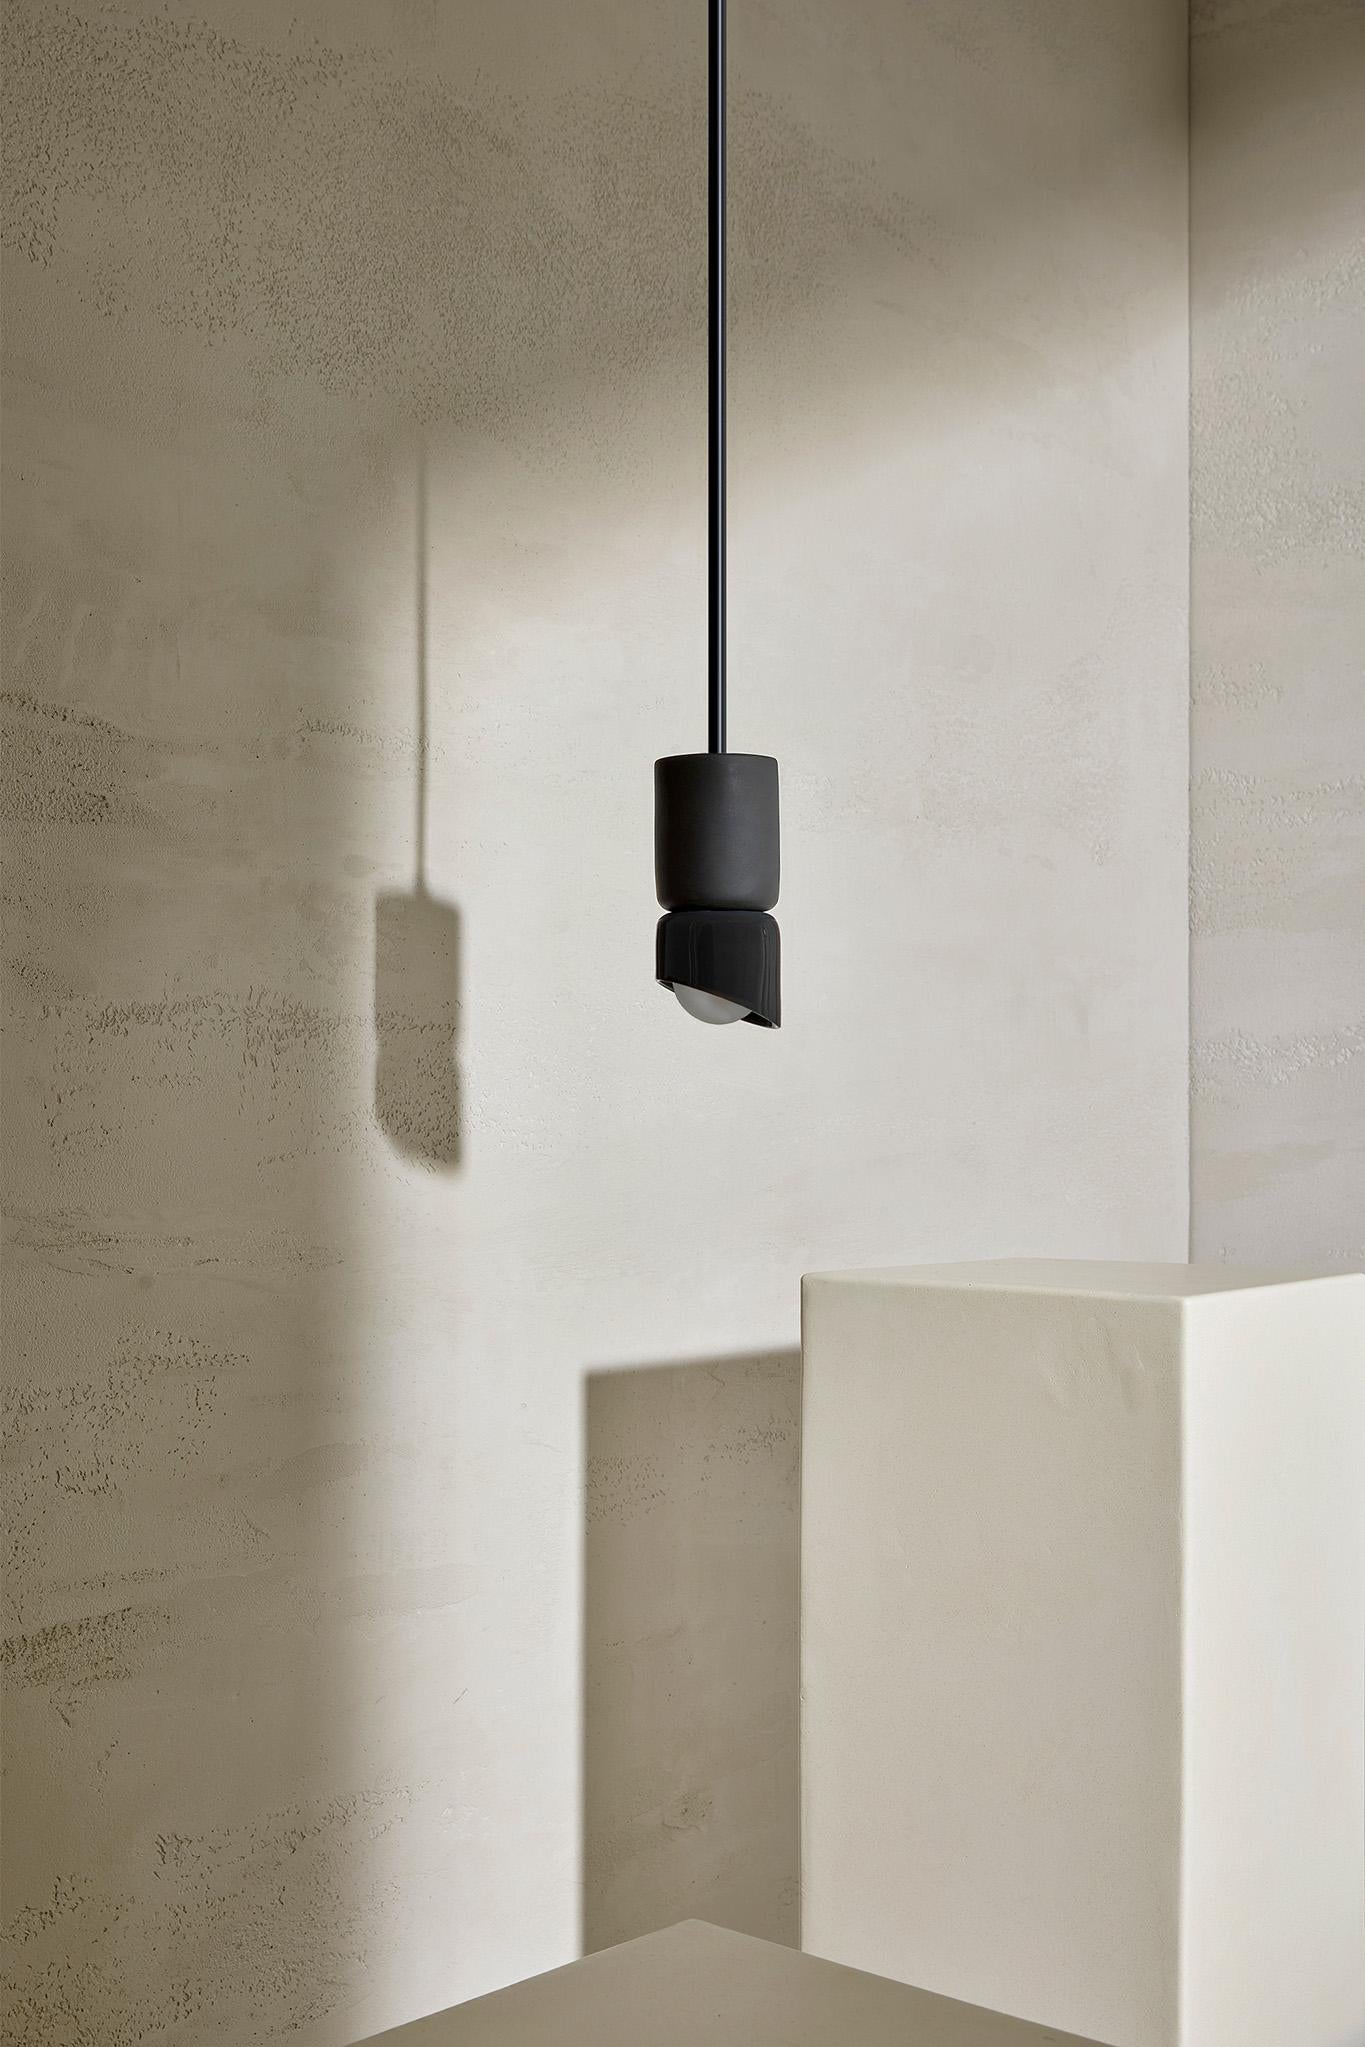 The Terra 1.5 Pendant Light is a layered matte cylinder and glazed base which creates an asymmetric stack of ceramic forms with two contrasting finishes. Available in a choice of three natural tones – Slate, Sage and Vanilla Bean, each component on